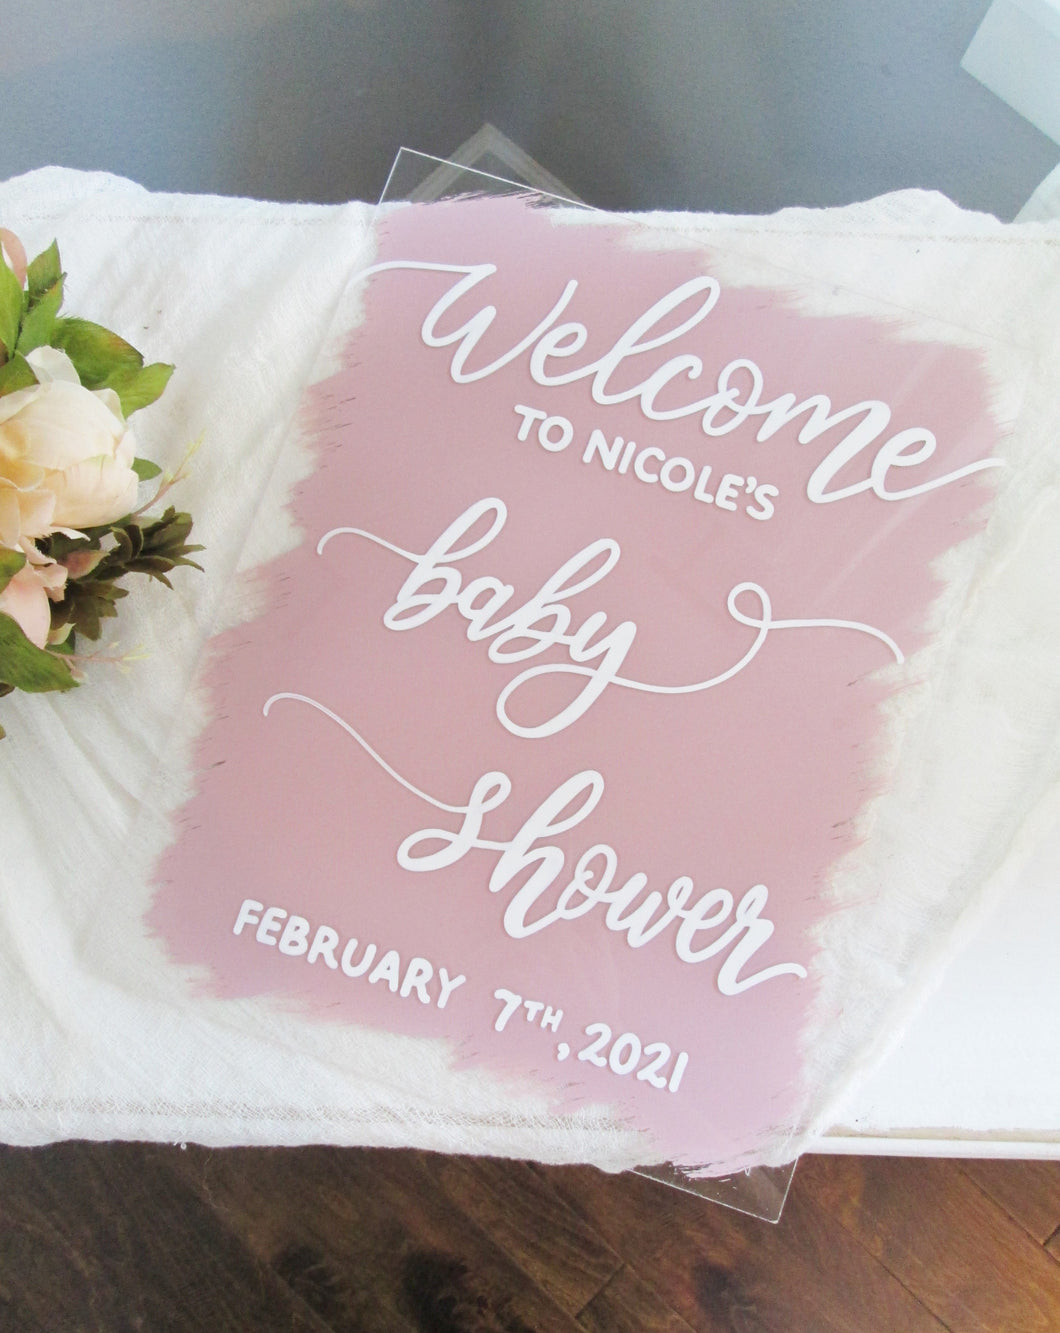 Personalized Acrylic Baby Shower Welcome Sign